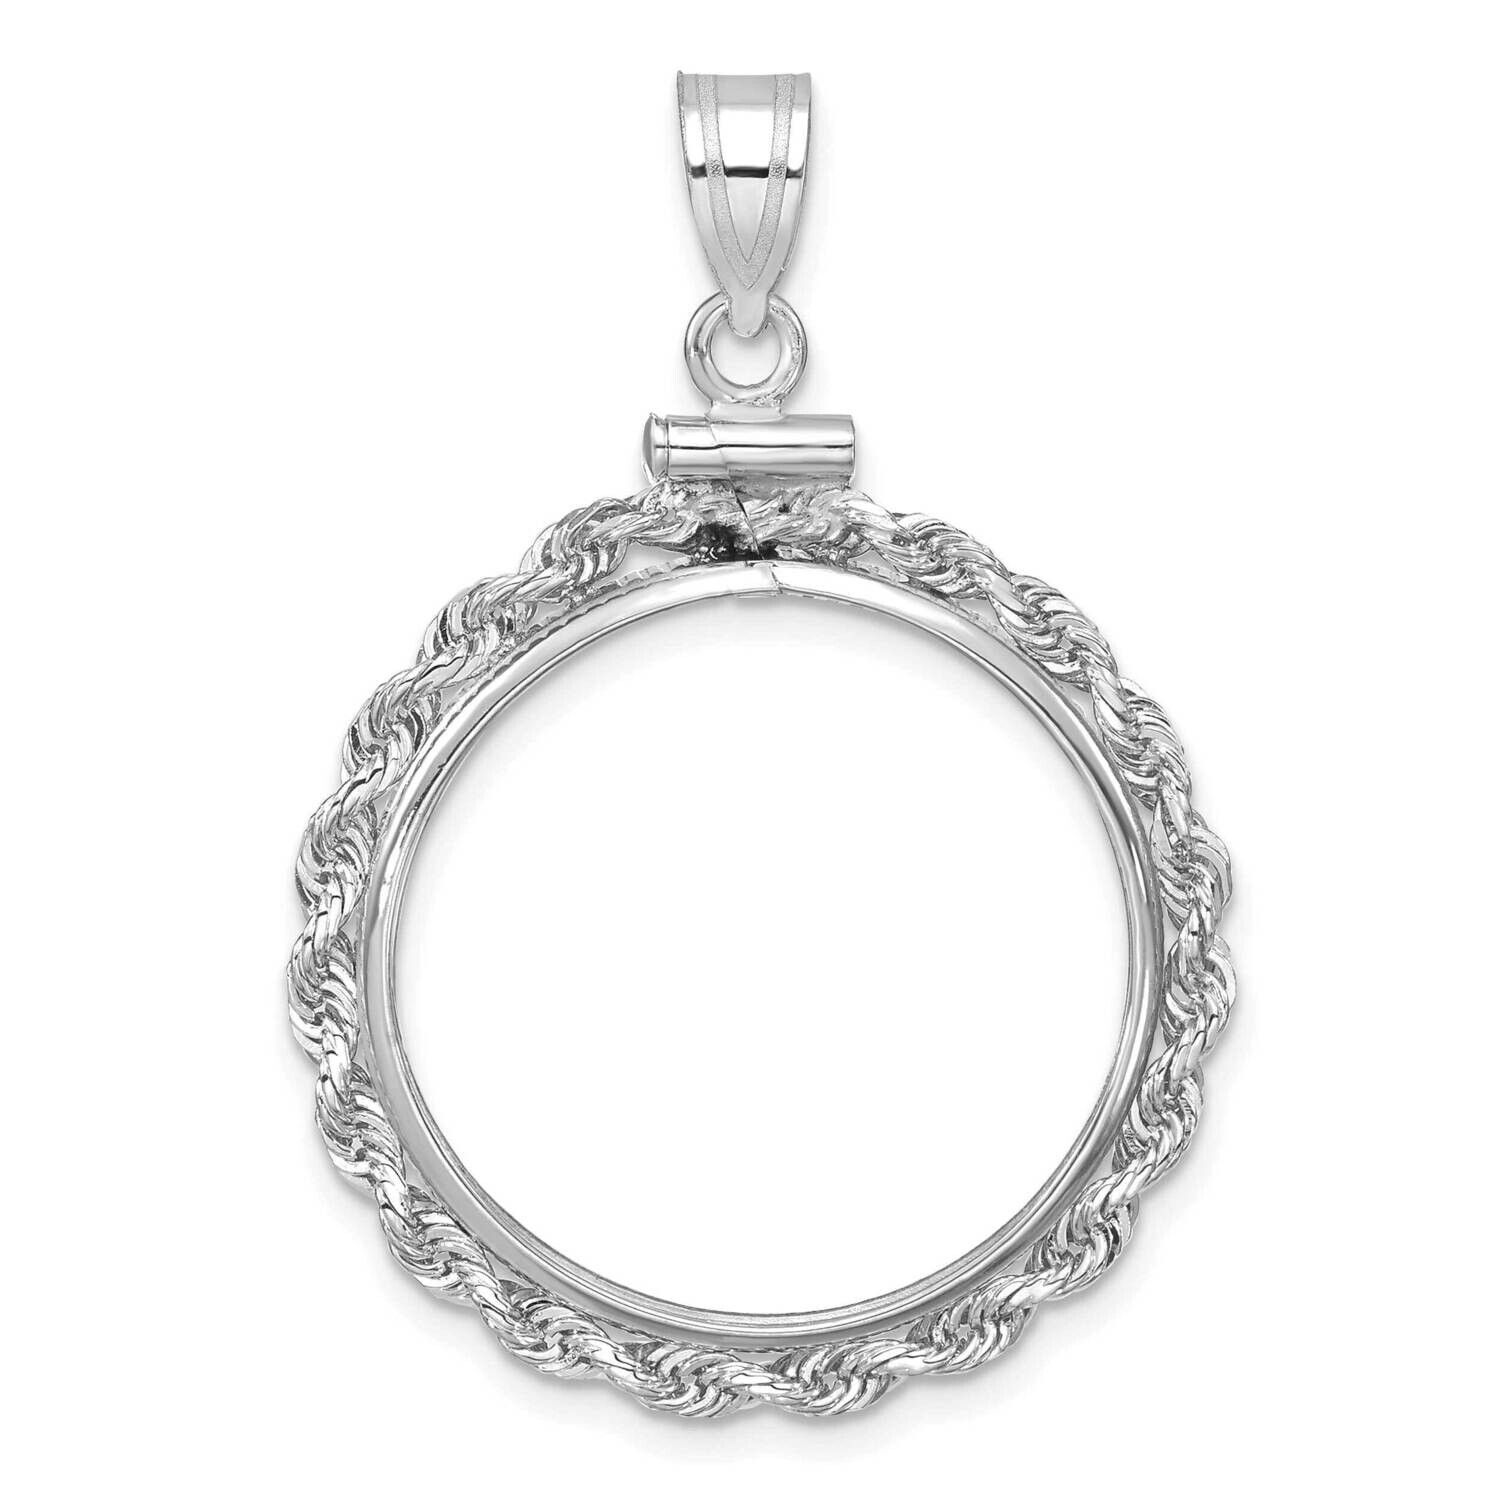 WidebDistinguished Coin Jewelry Rope Screw Top 22.0mm X 1.9mm Coin Bezel Pendant 14k White Gold C1215W/22.0